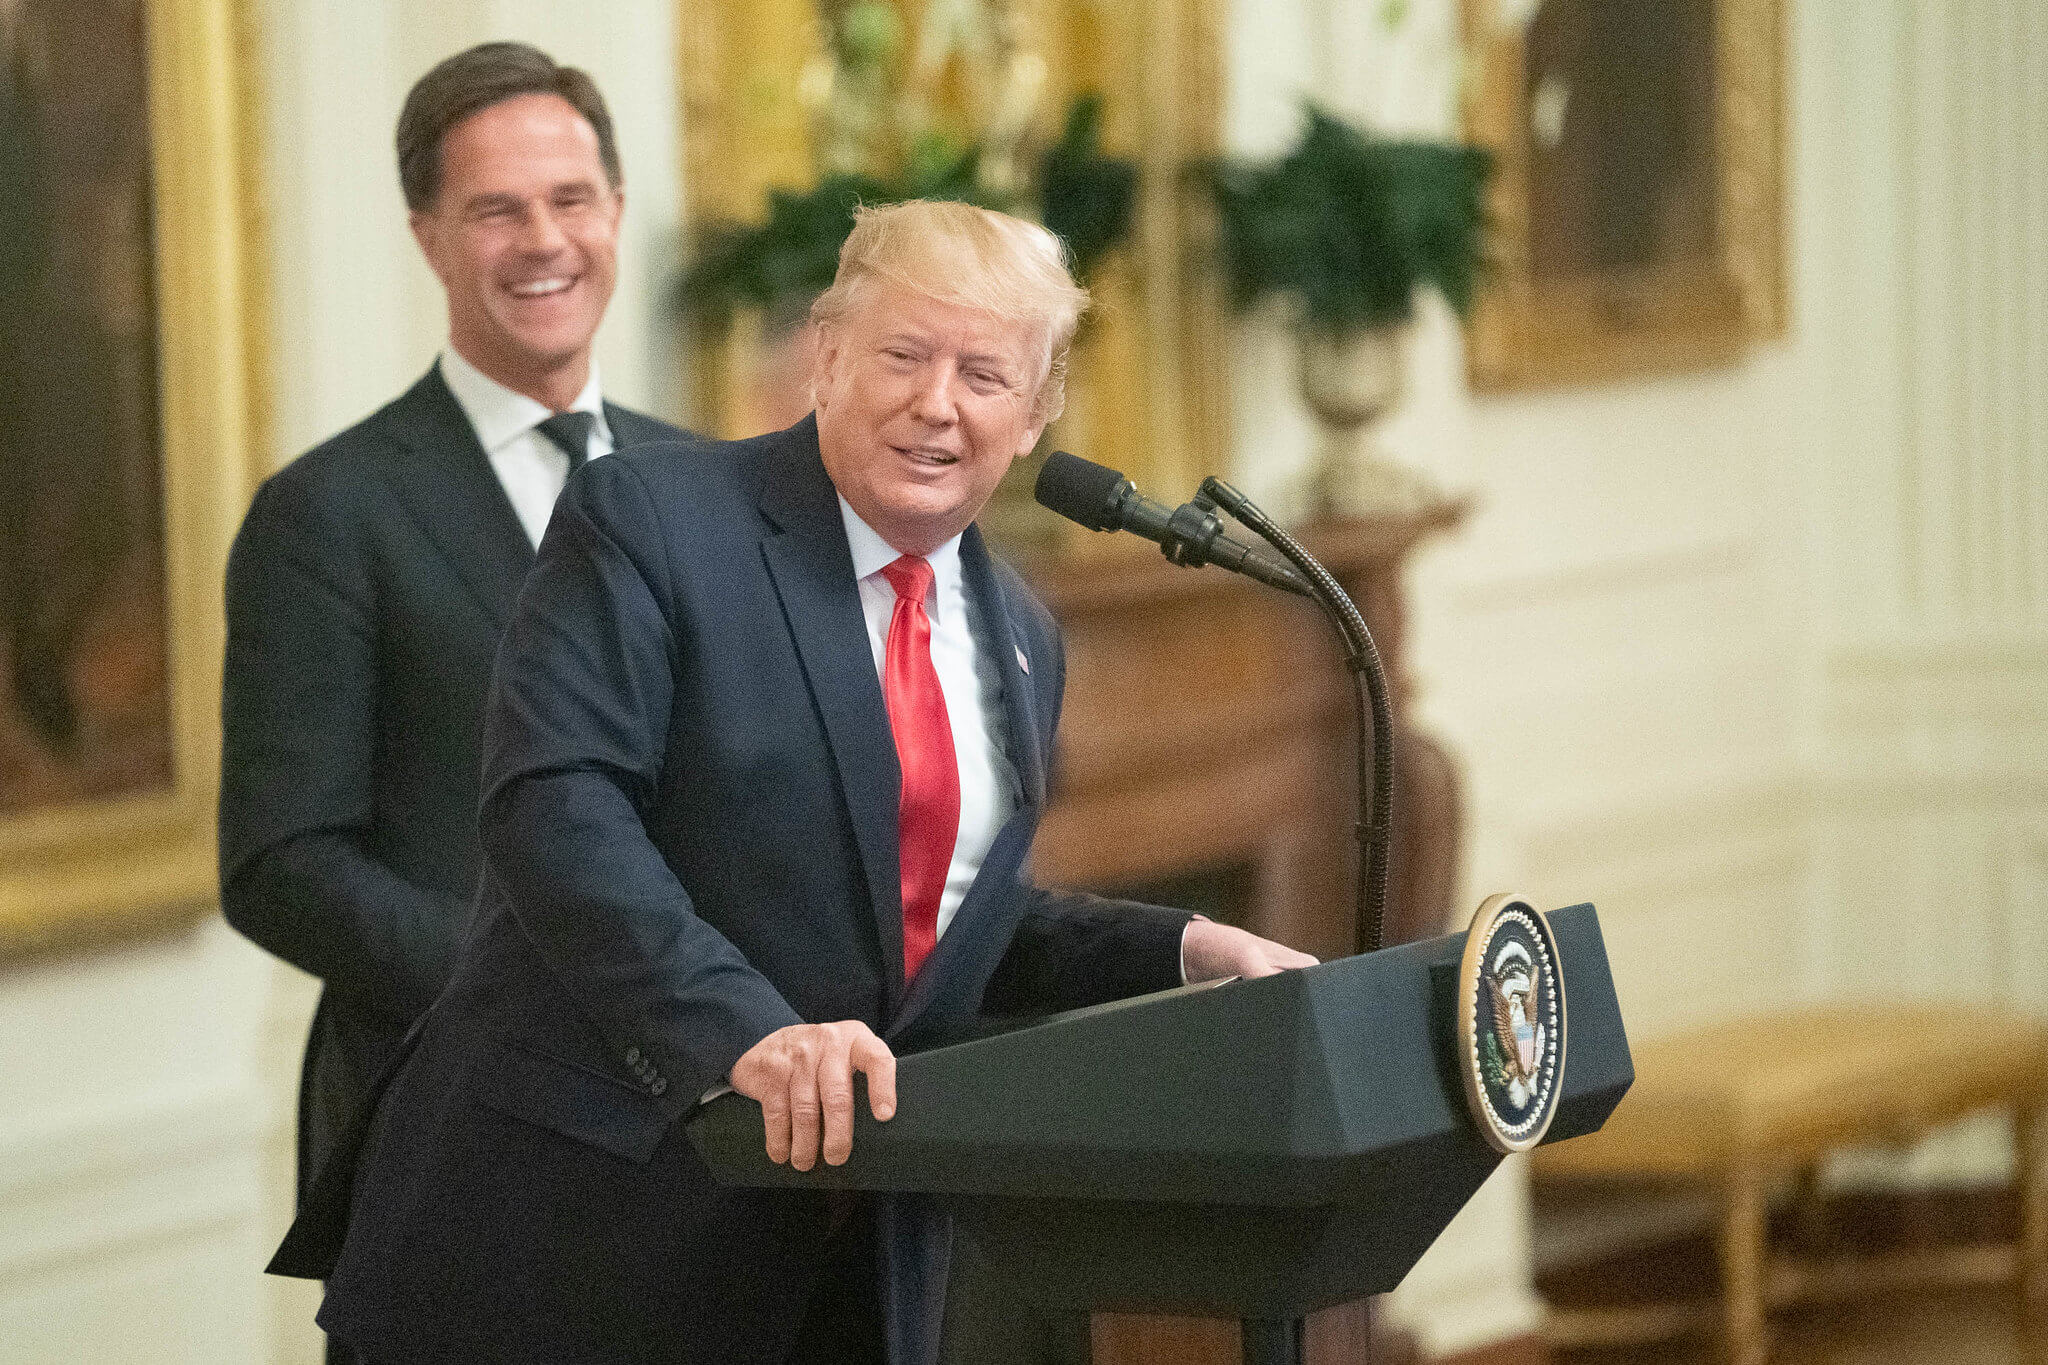 Boxhoorn-President Trump Meets with the Prime Minister of the Netherlands in 2019. The White House